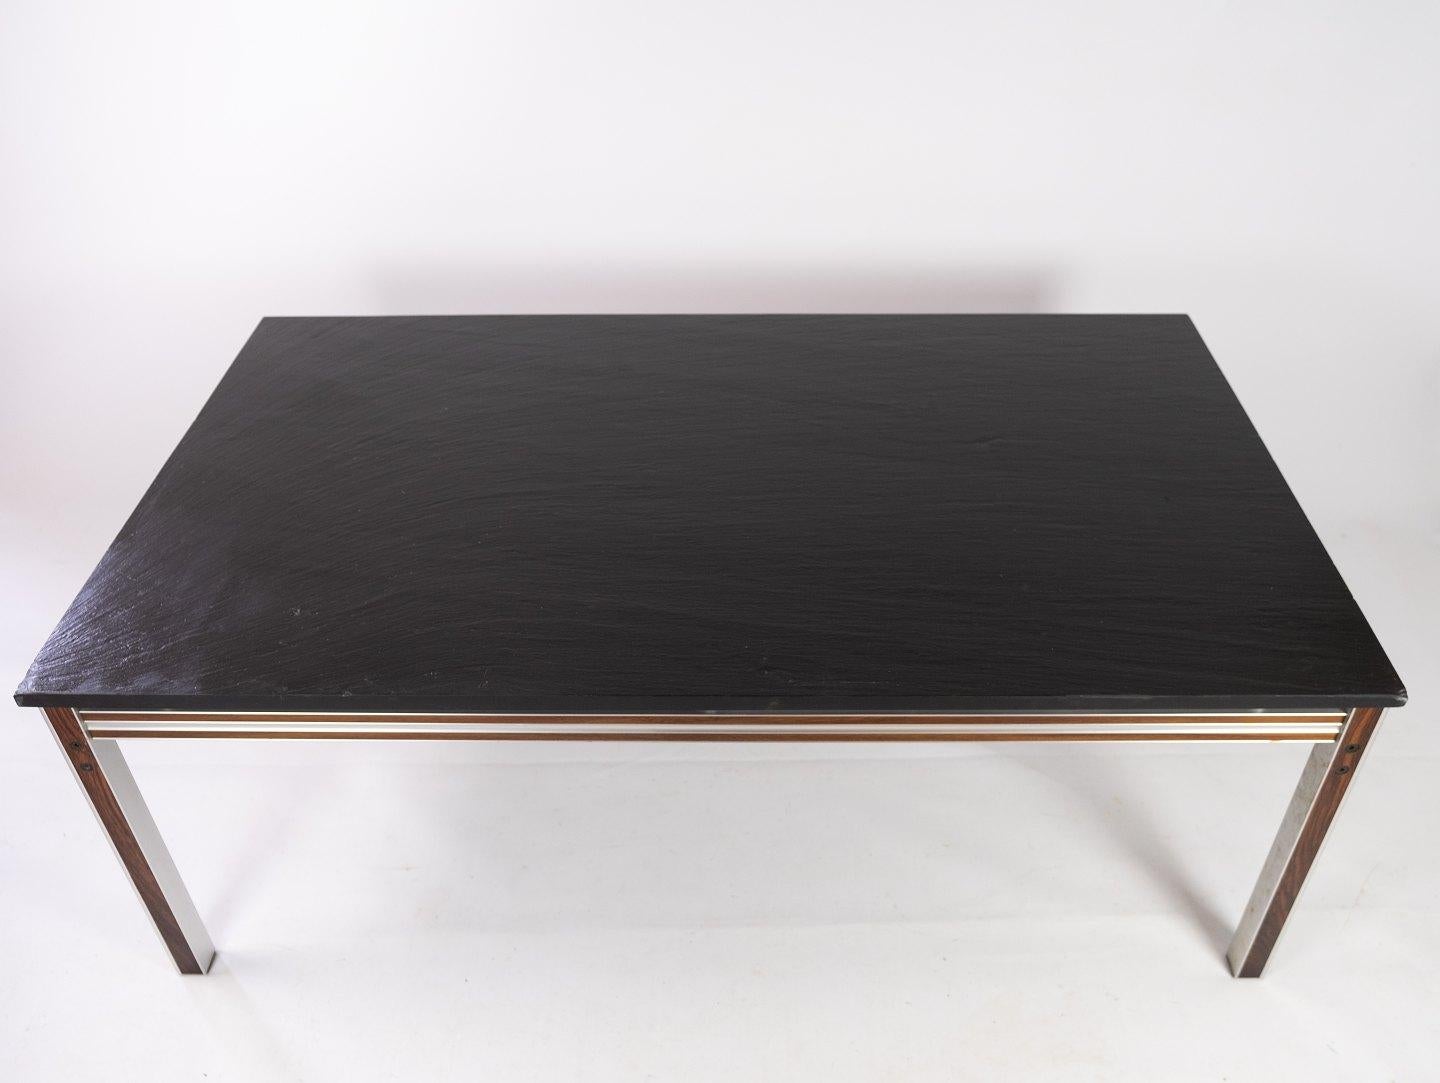 This coffee table epitomizes the sleek and modern aesthetic of Danish design from the 1970s. Crafted with a minimalist yet striking approach, it features a black slate plate elegantly juxtaposed against a frame crafted from rich rosewood and metal